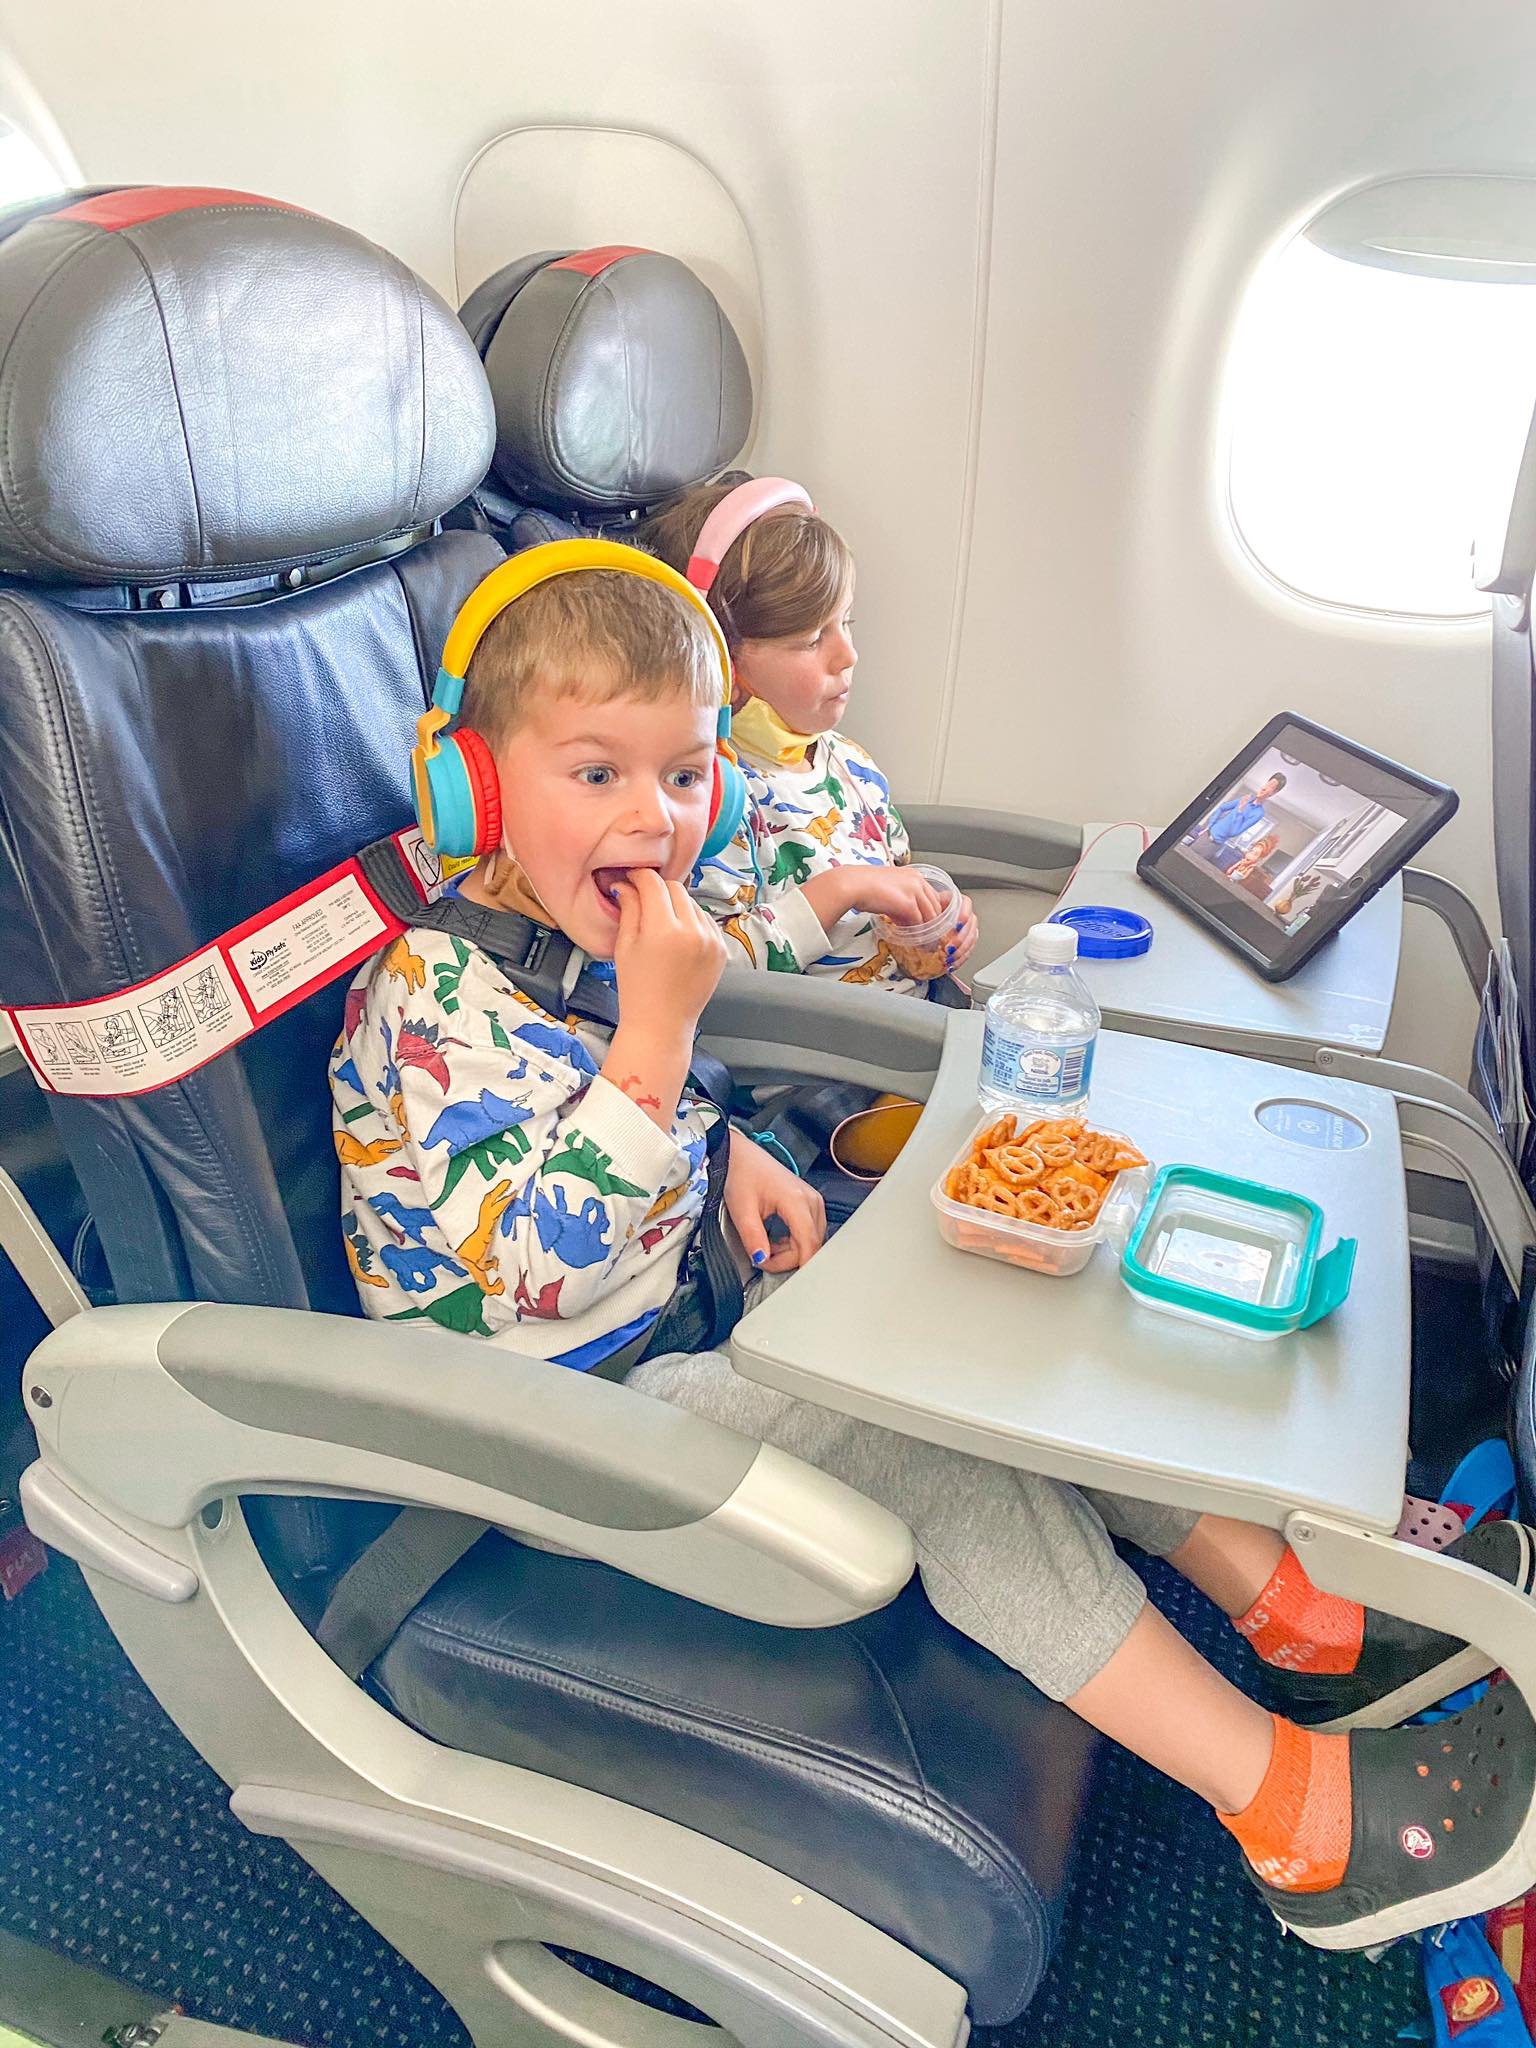 5 Best Airplane Beds So Your Kids Can Travel Long Haul Comfortably